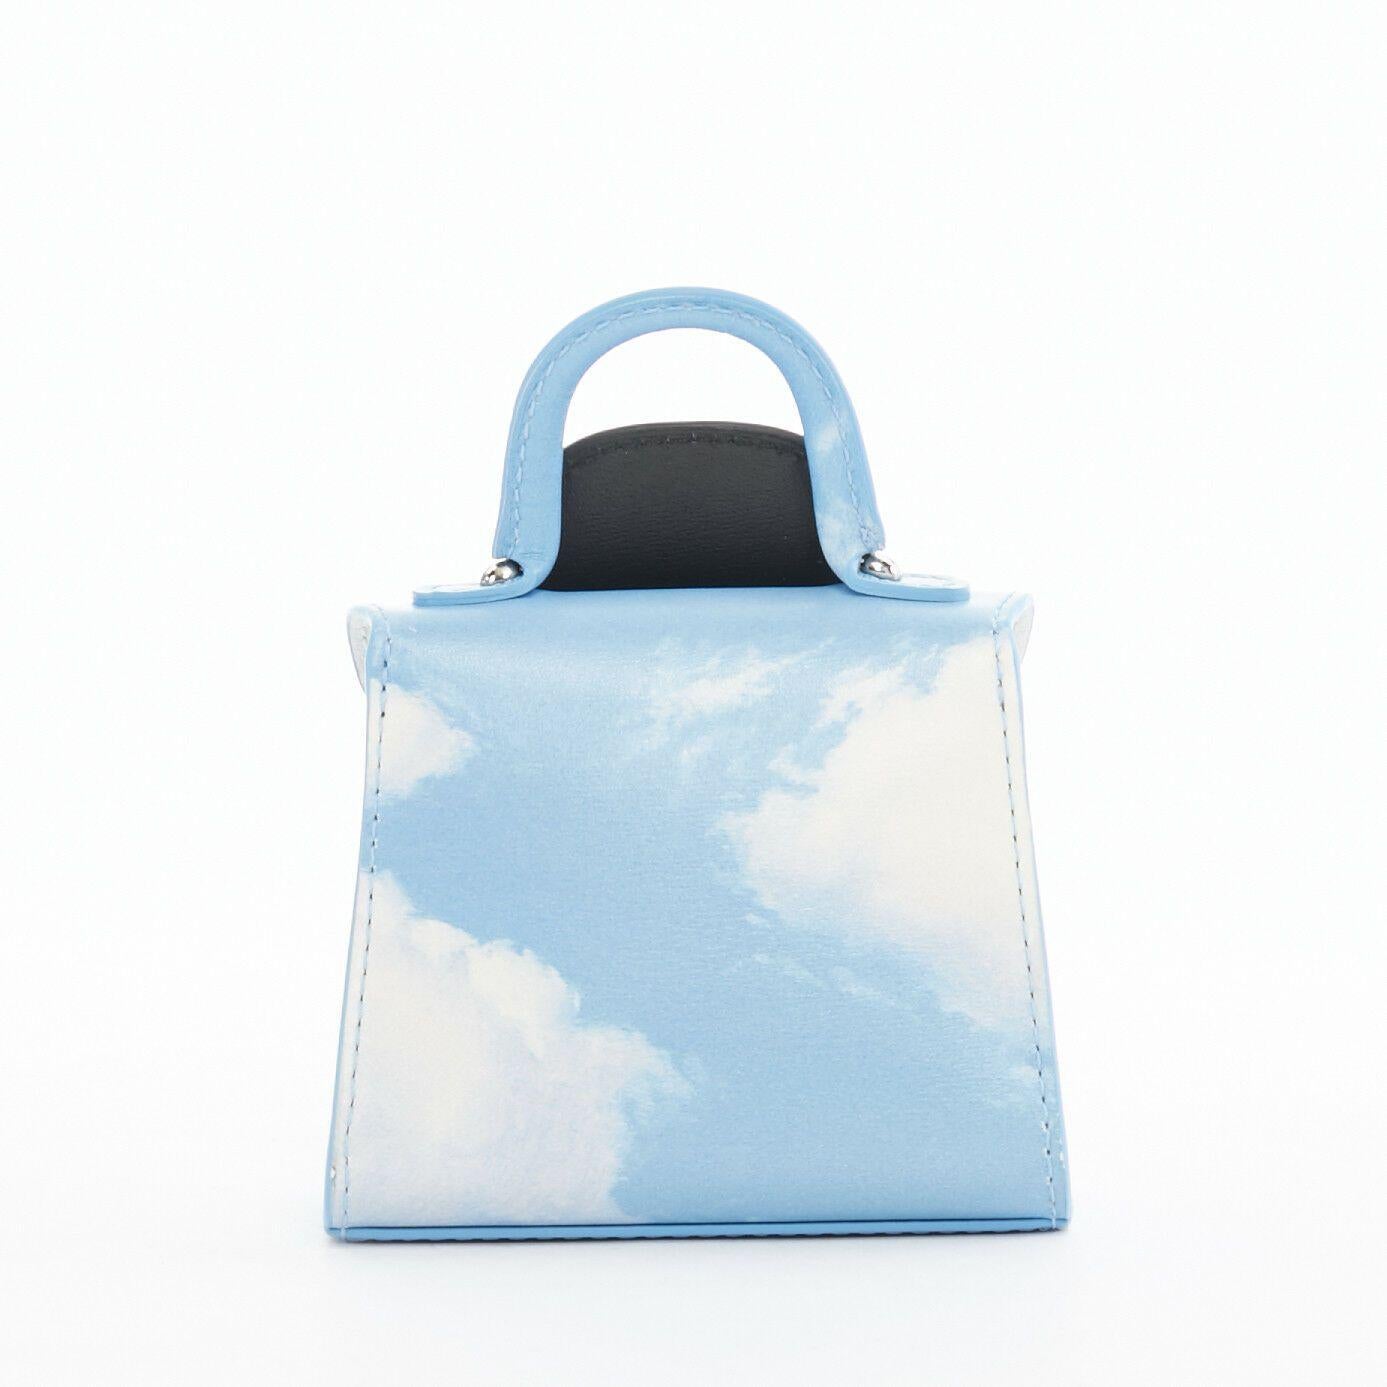 DELVAUX Rene Magritte Miniatures Belgitude bowler hat cloud print mini bag charm
DELVAUX
Knokke is mostly known as a coastal resort town where fabulous celebrities hide away for the summer. Many art connoisseurs will
appreciate this miniature as it